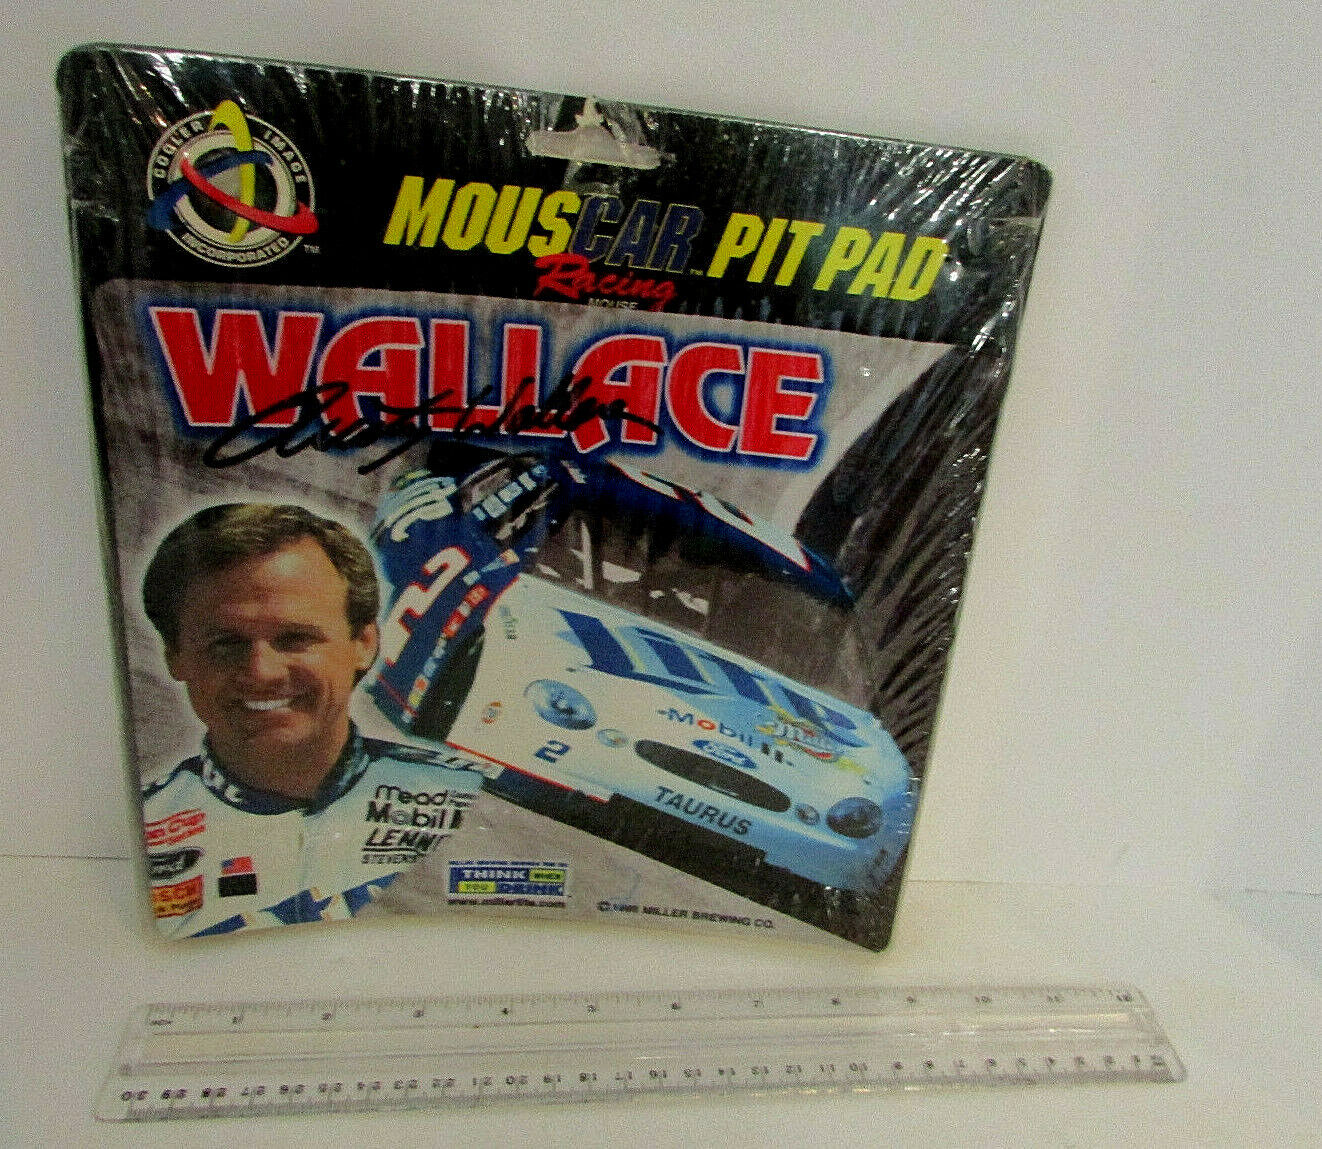 Wallace NASCAR 1998 MousCar Pit Pad Miller Brewing Co. Cooler Image  